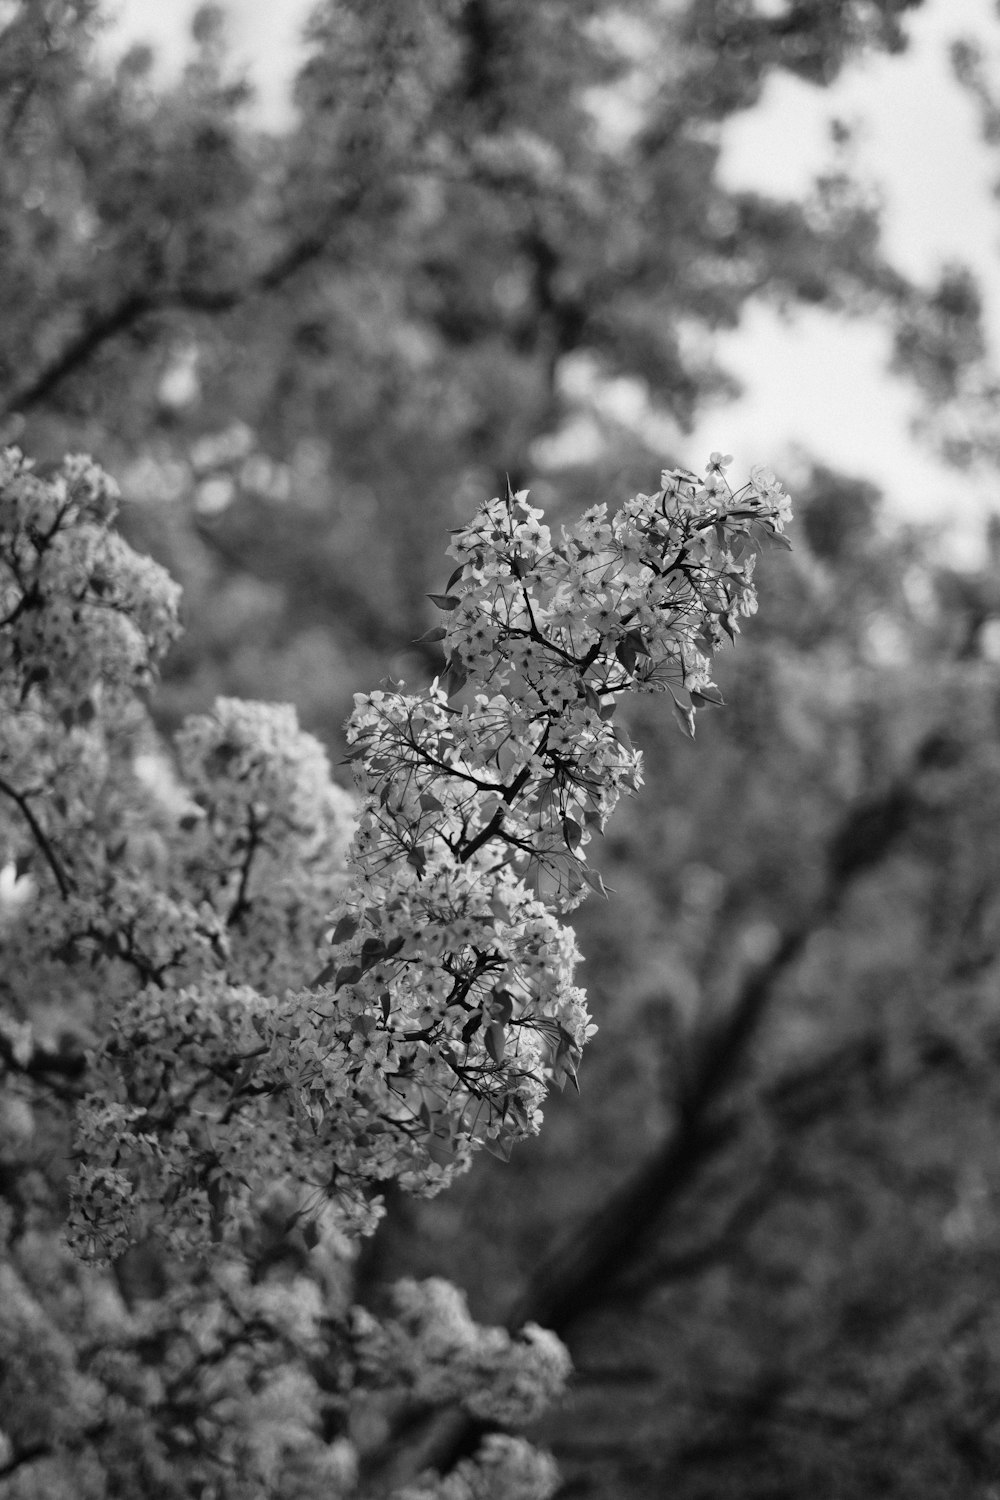 grayscale photo of cherry blossom